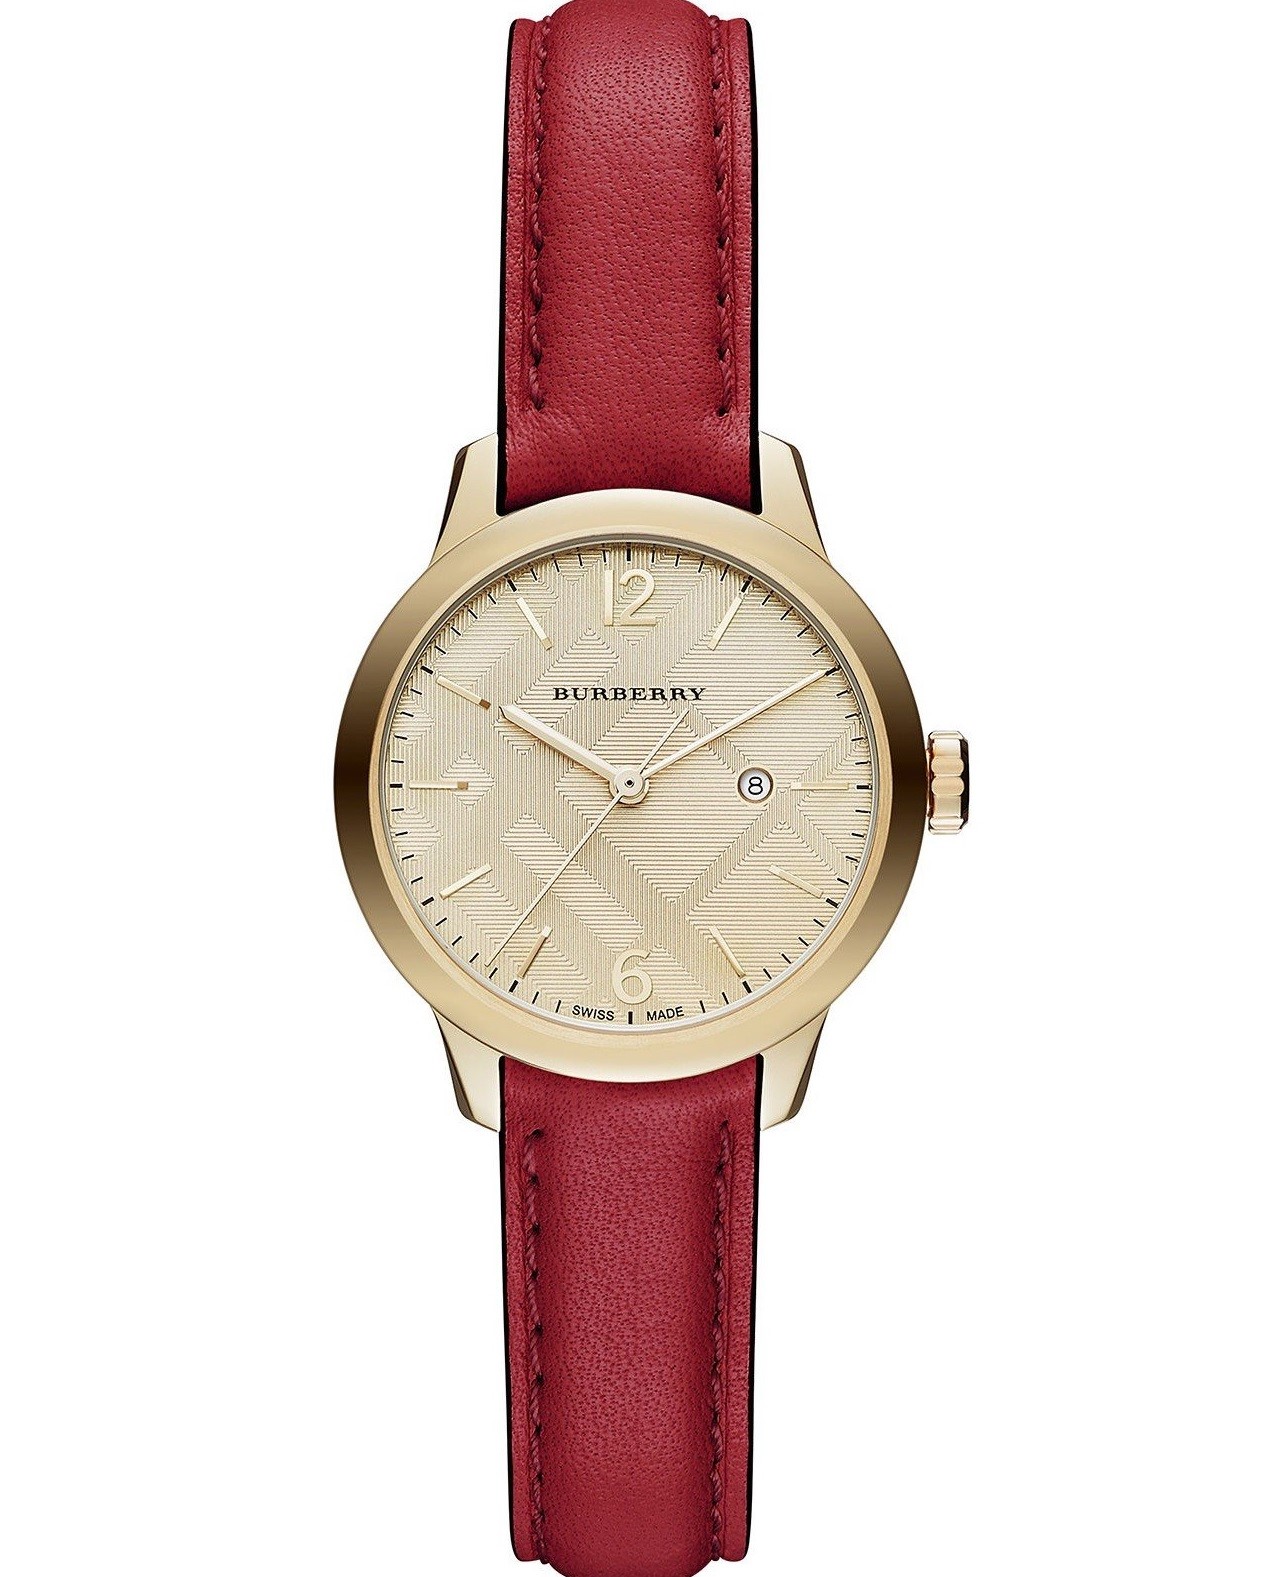 ĐỒNG HỒ NỮ BURBERRY THE CLASSIC ROUND RED LEATHER STRAP LADIES WATCH BU10102 4